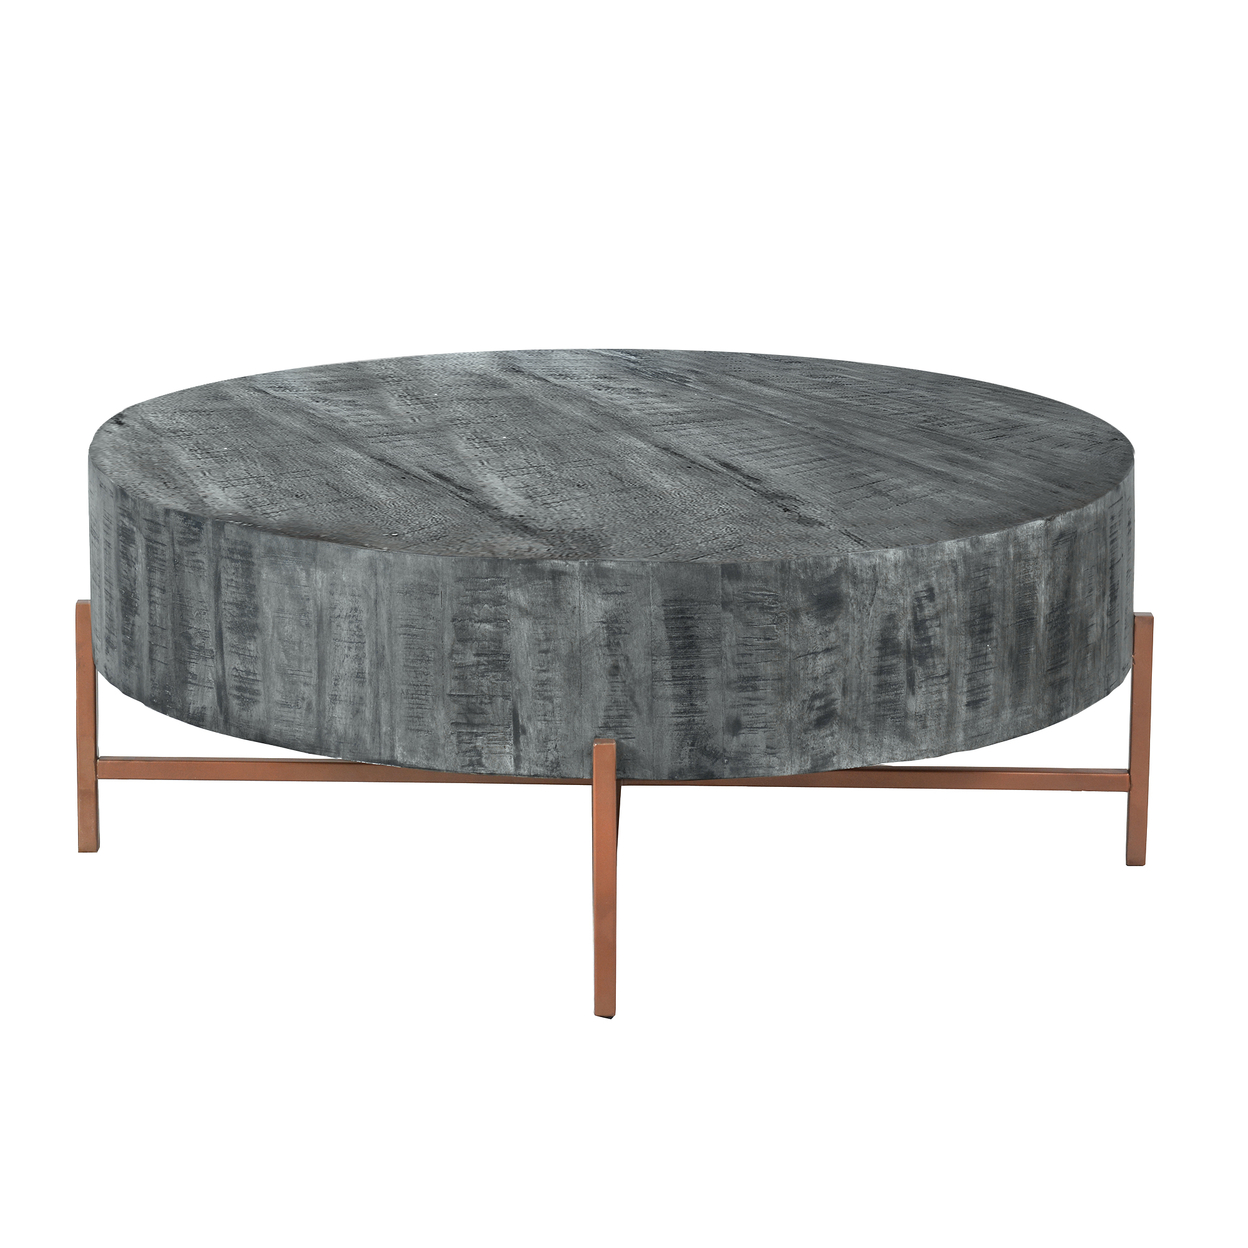 Buy 40 Inch Round Wooden Coffee Table with Cross Metal